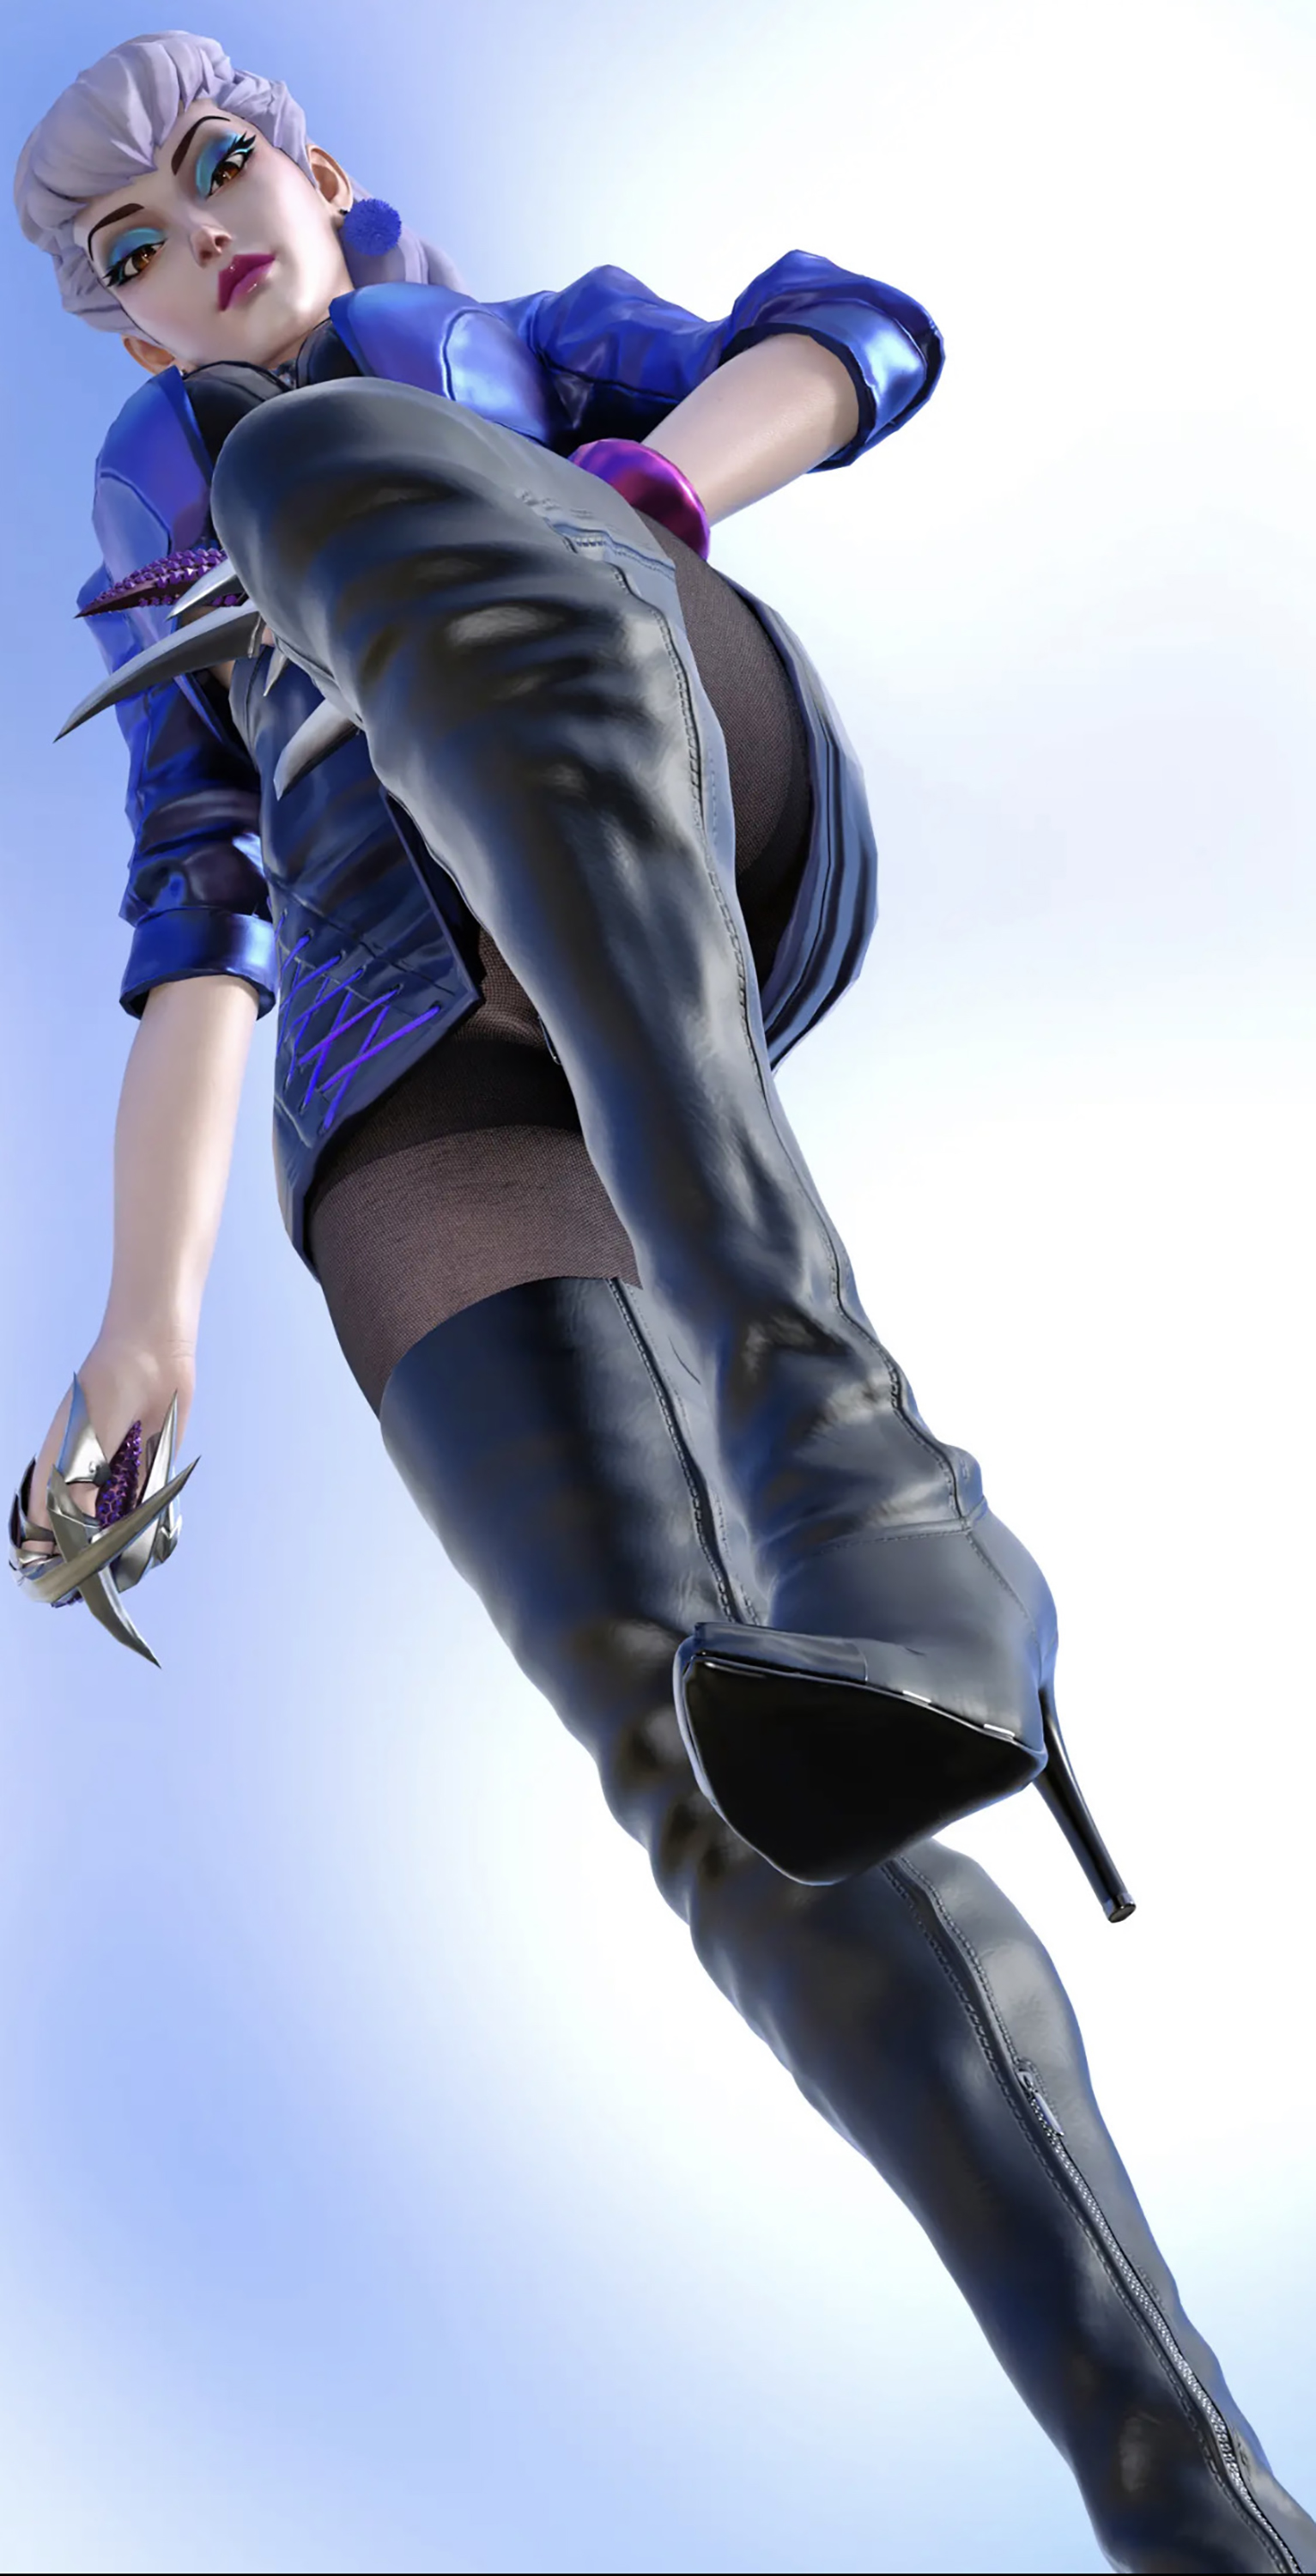 High Heeled Boots Heeled Shoes Look Down Silk Stockings Vertical Video Game Girls League Of Legends 1533x3000